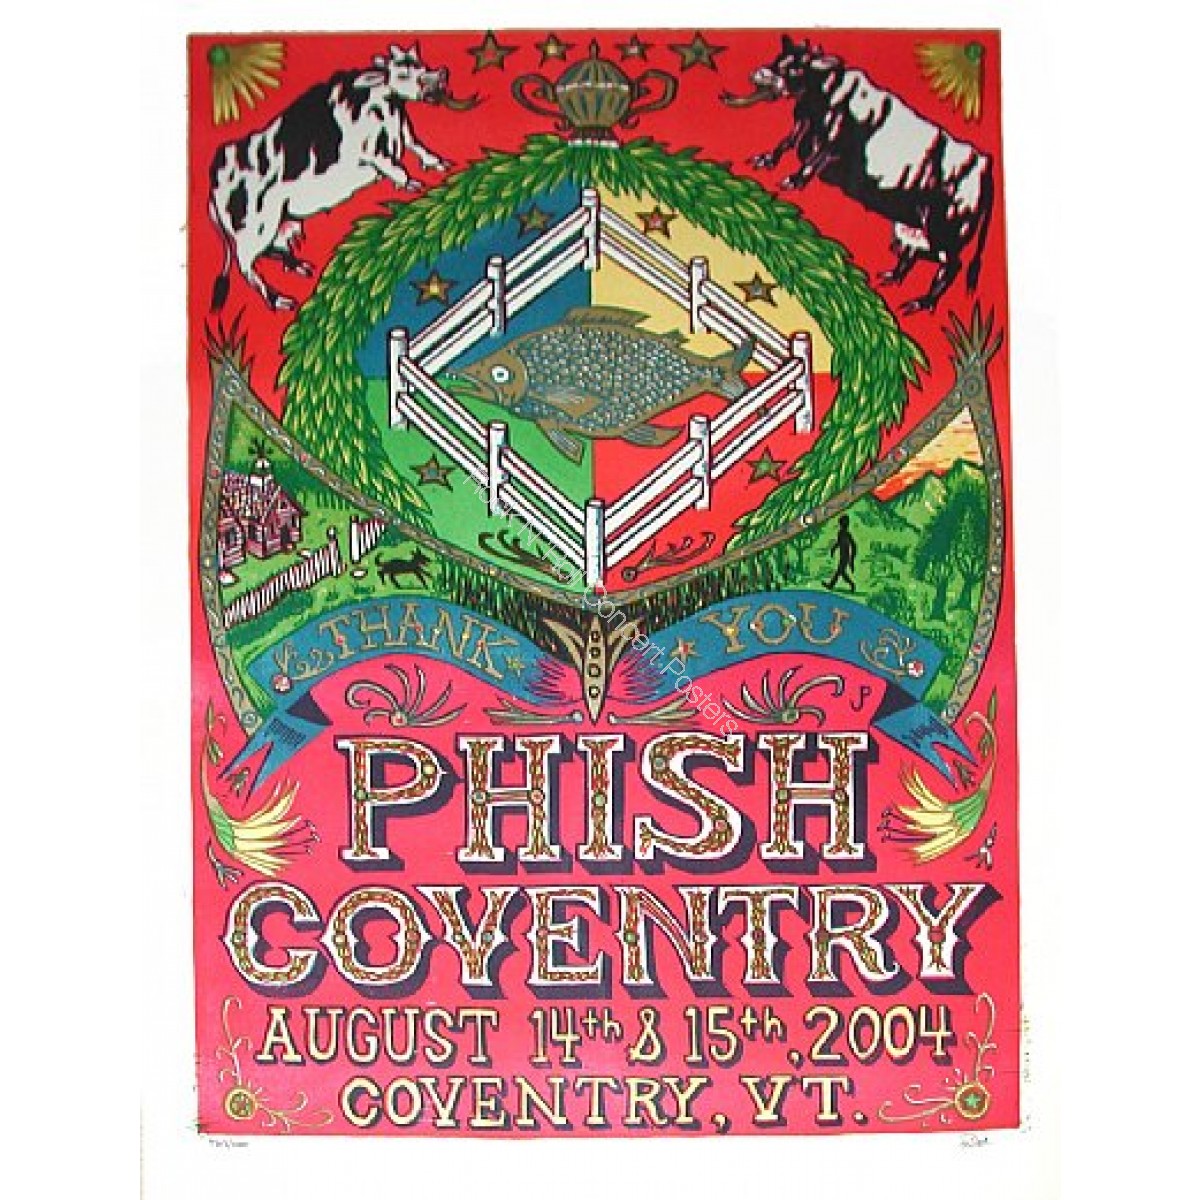 Phish Coventry by Pollock